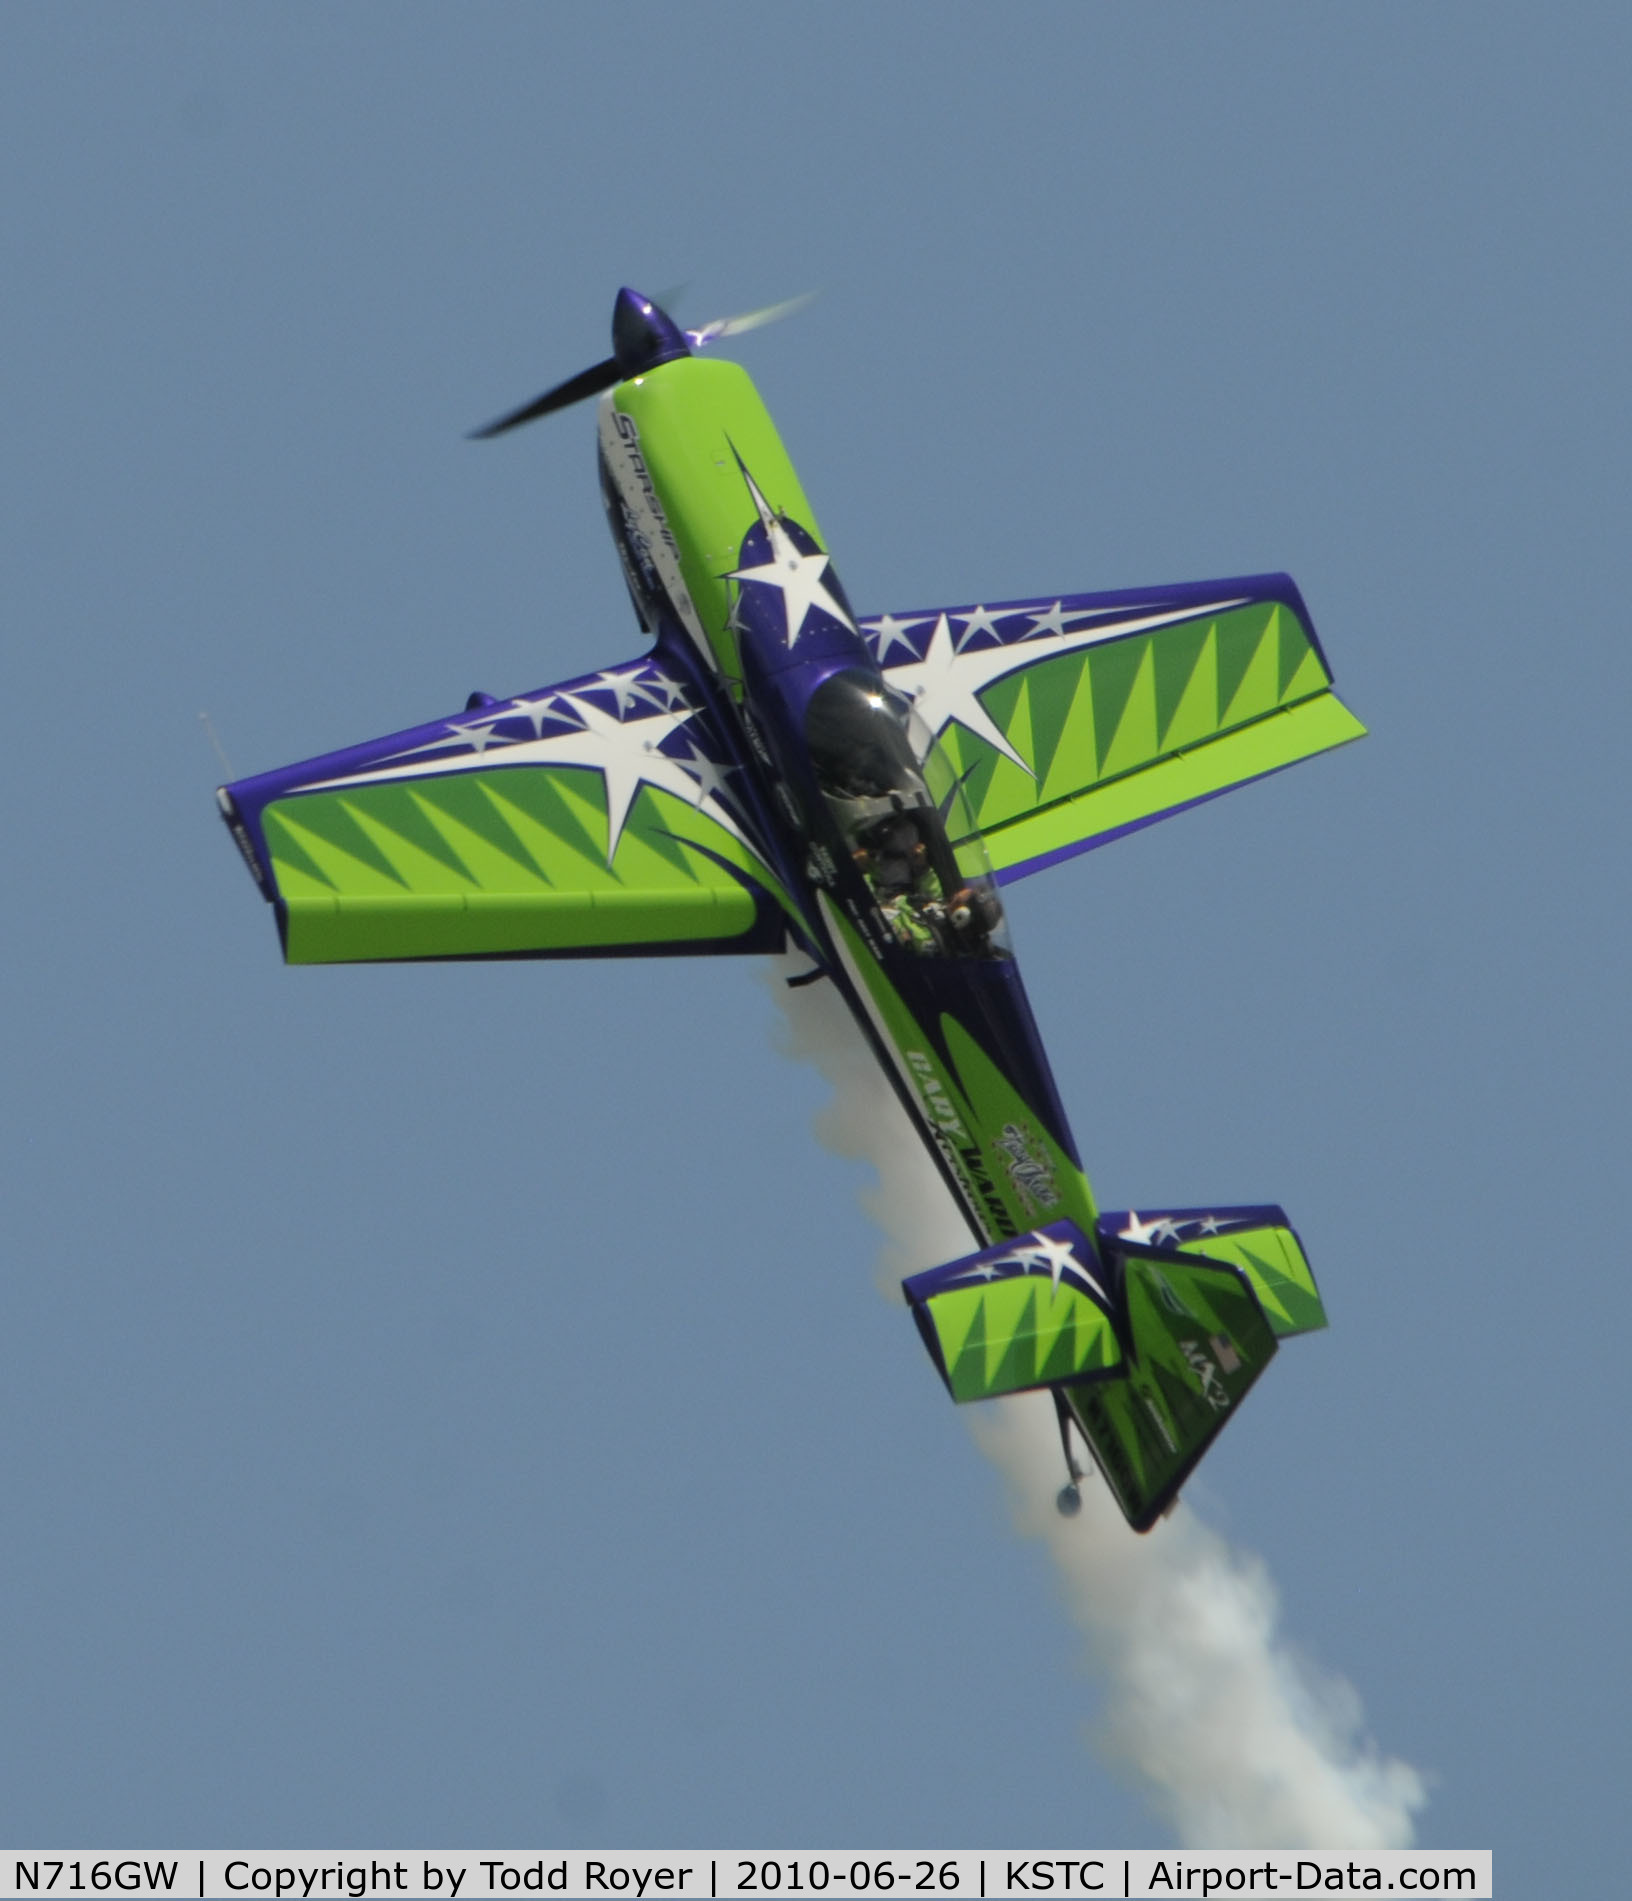 N716GW, 2006 MX Aircraft MX2 C/N 4, performing at the Great Minnesota Air Show